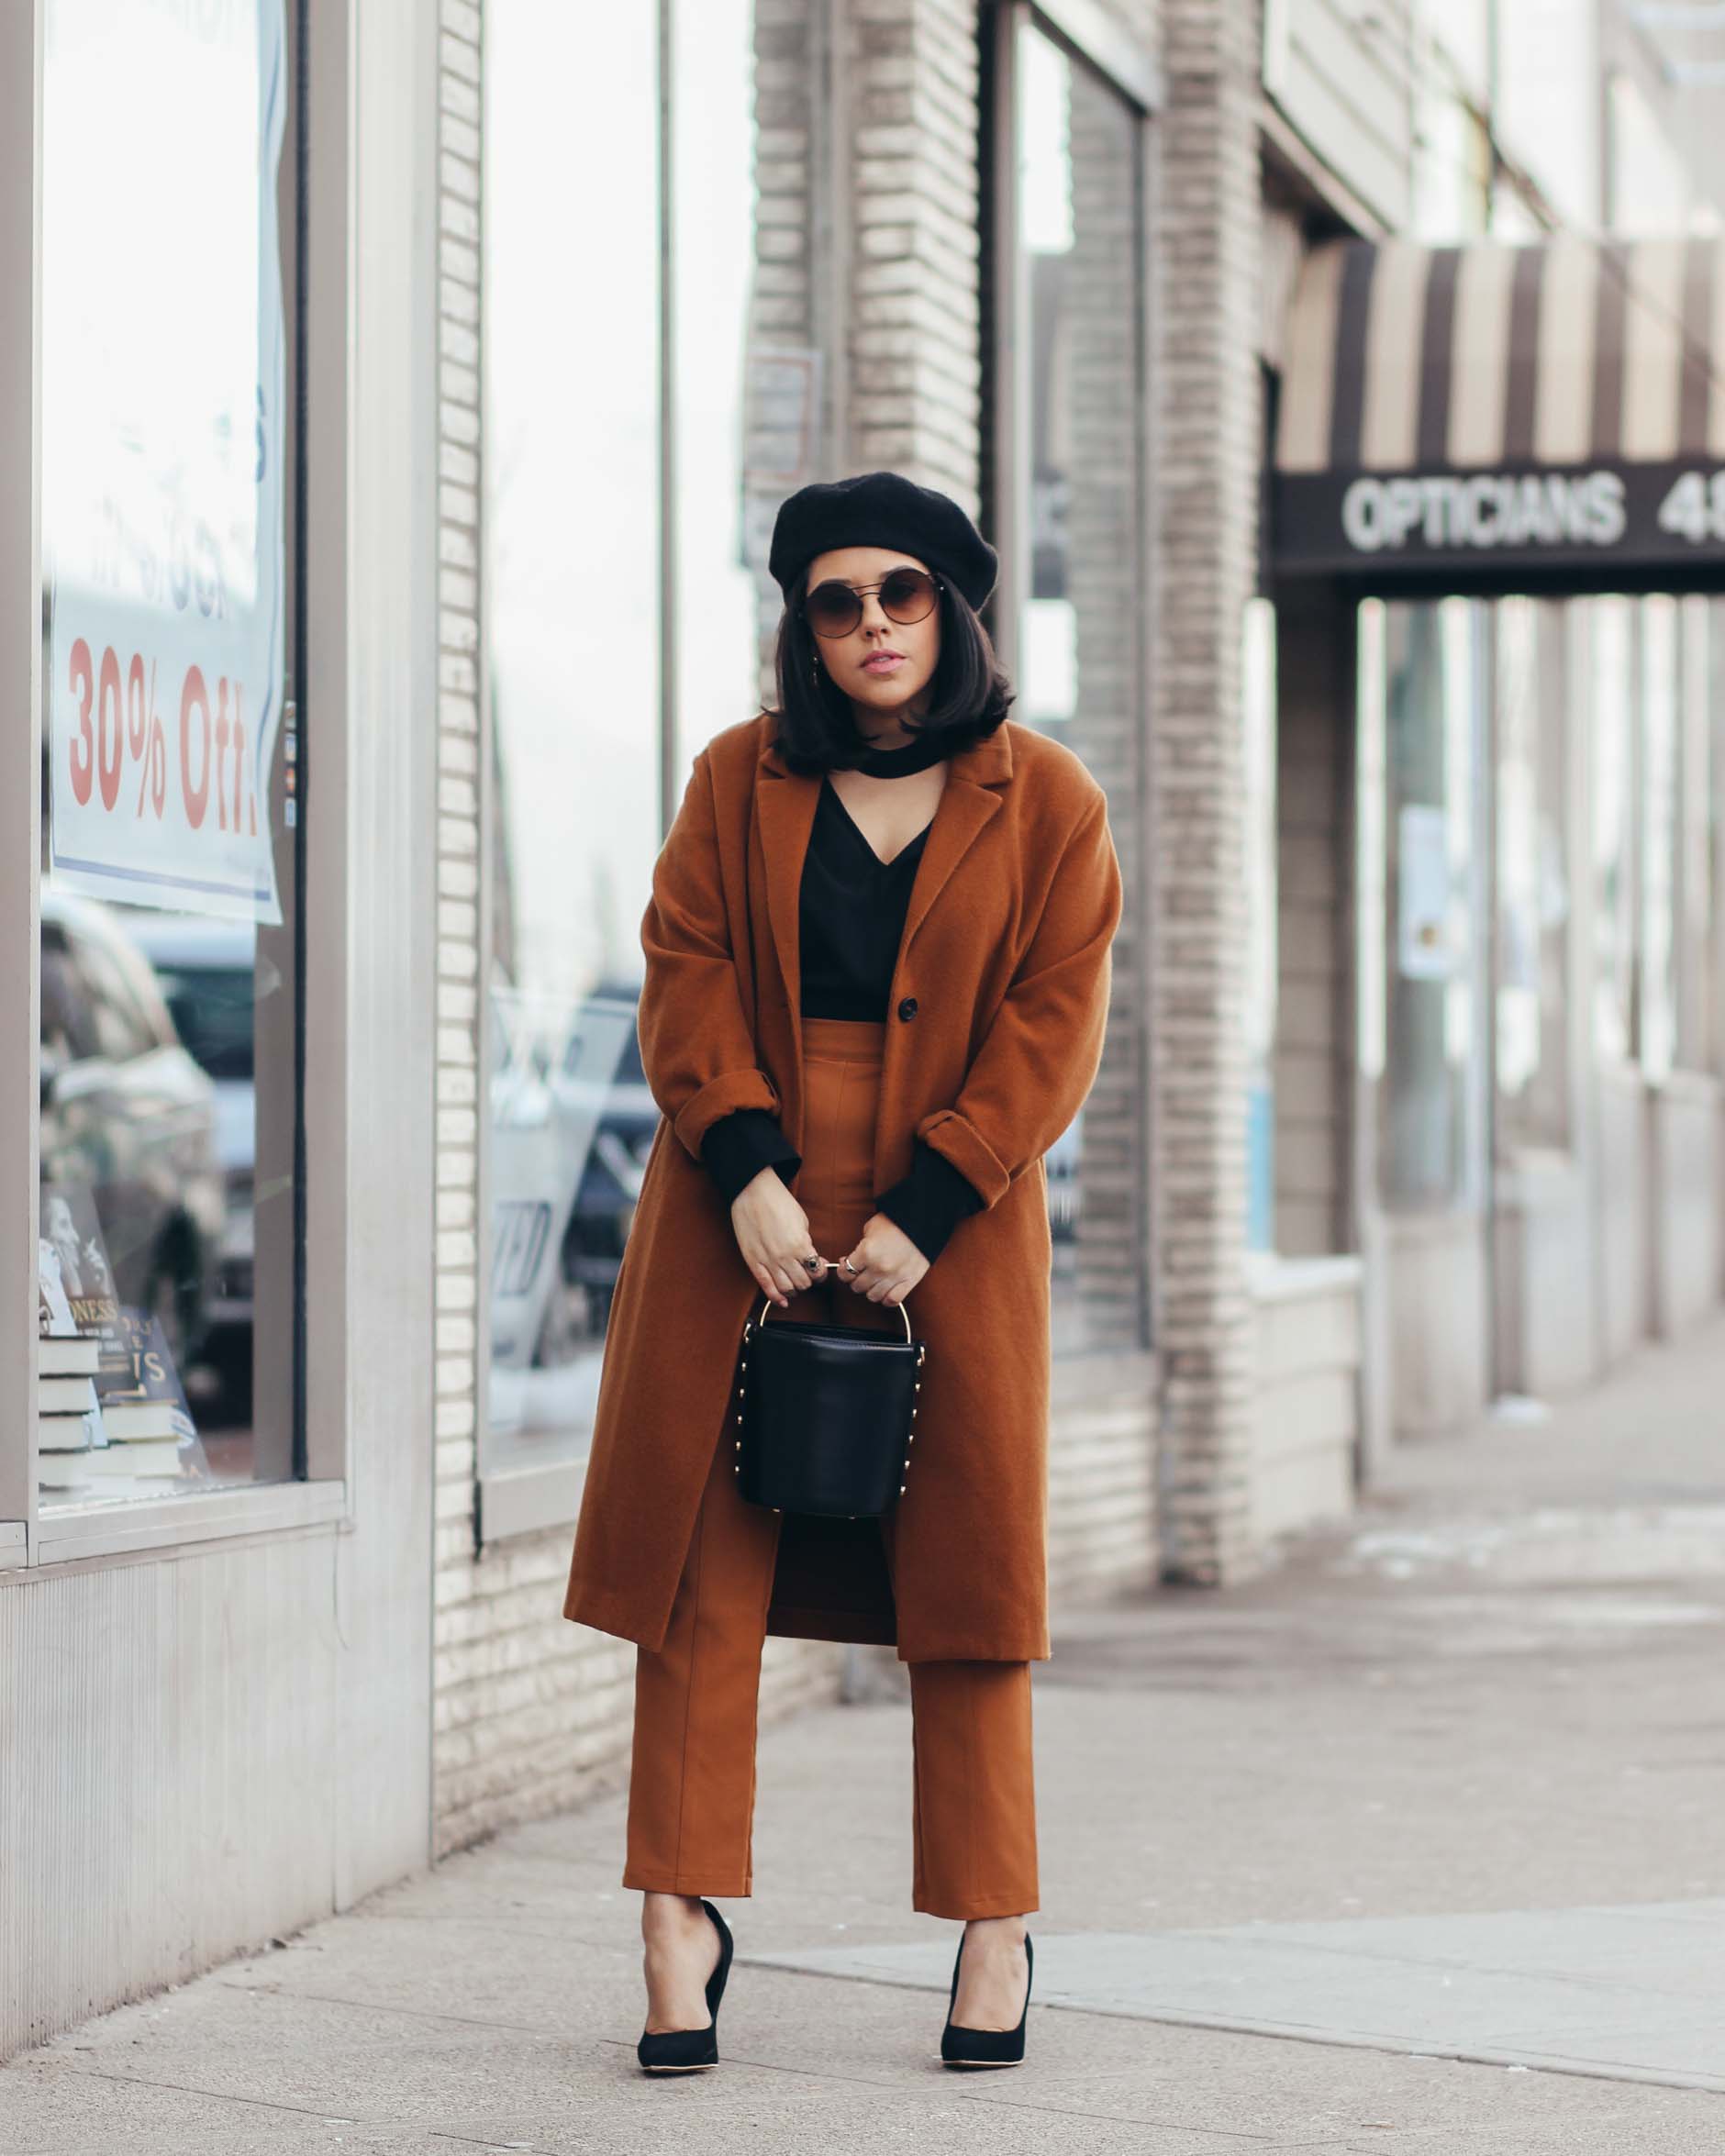 lifestyle blogger naty michele wearing a camel and black outfit